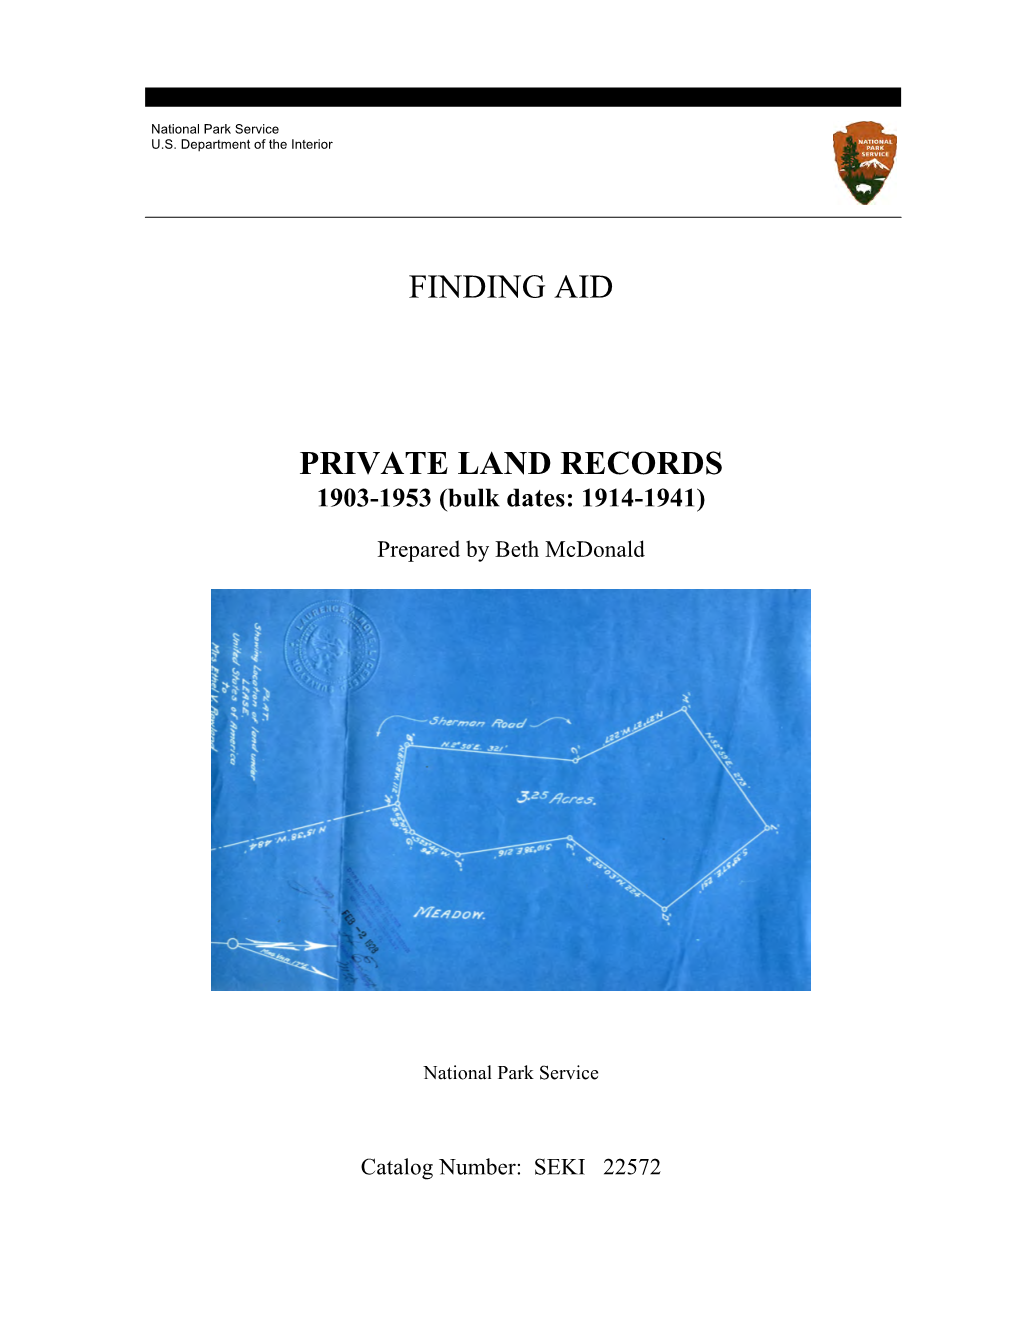 Private Land Records Finding